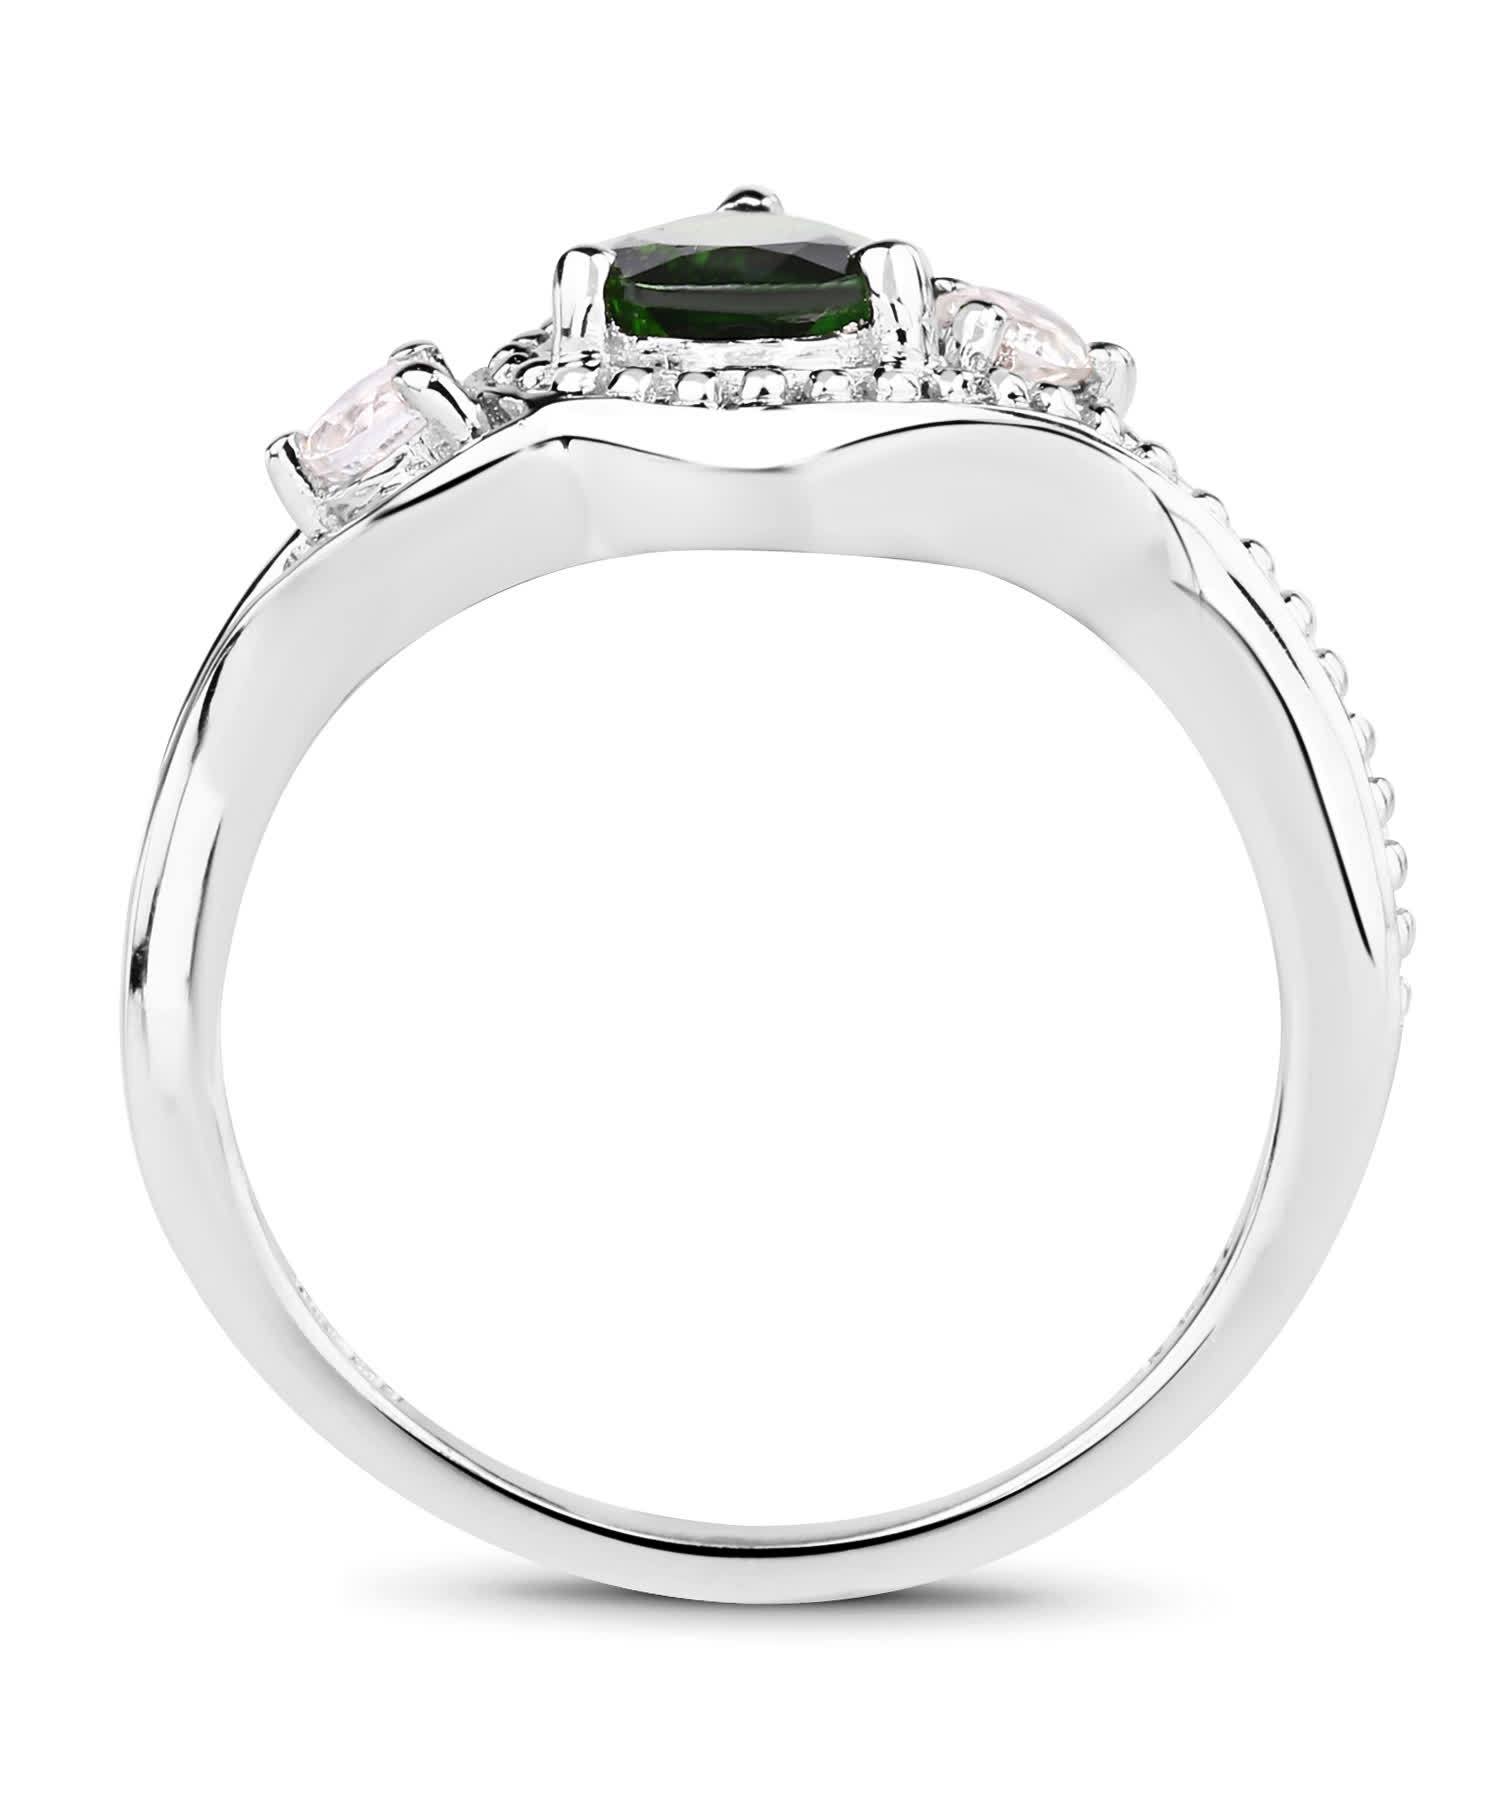 1.30ctw Natural Forest Green Chrome Diopside and Topaz Rhodium Plated 925 Sterling Silver Ring View 2